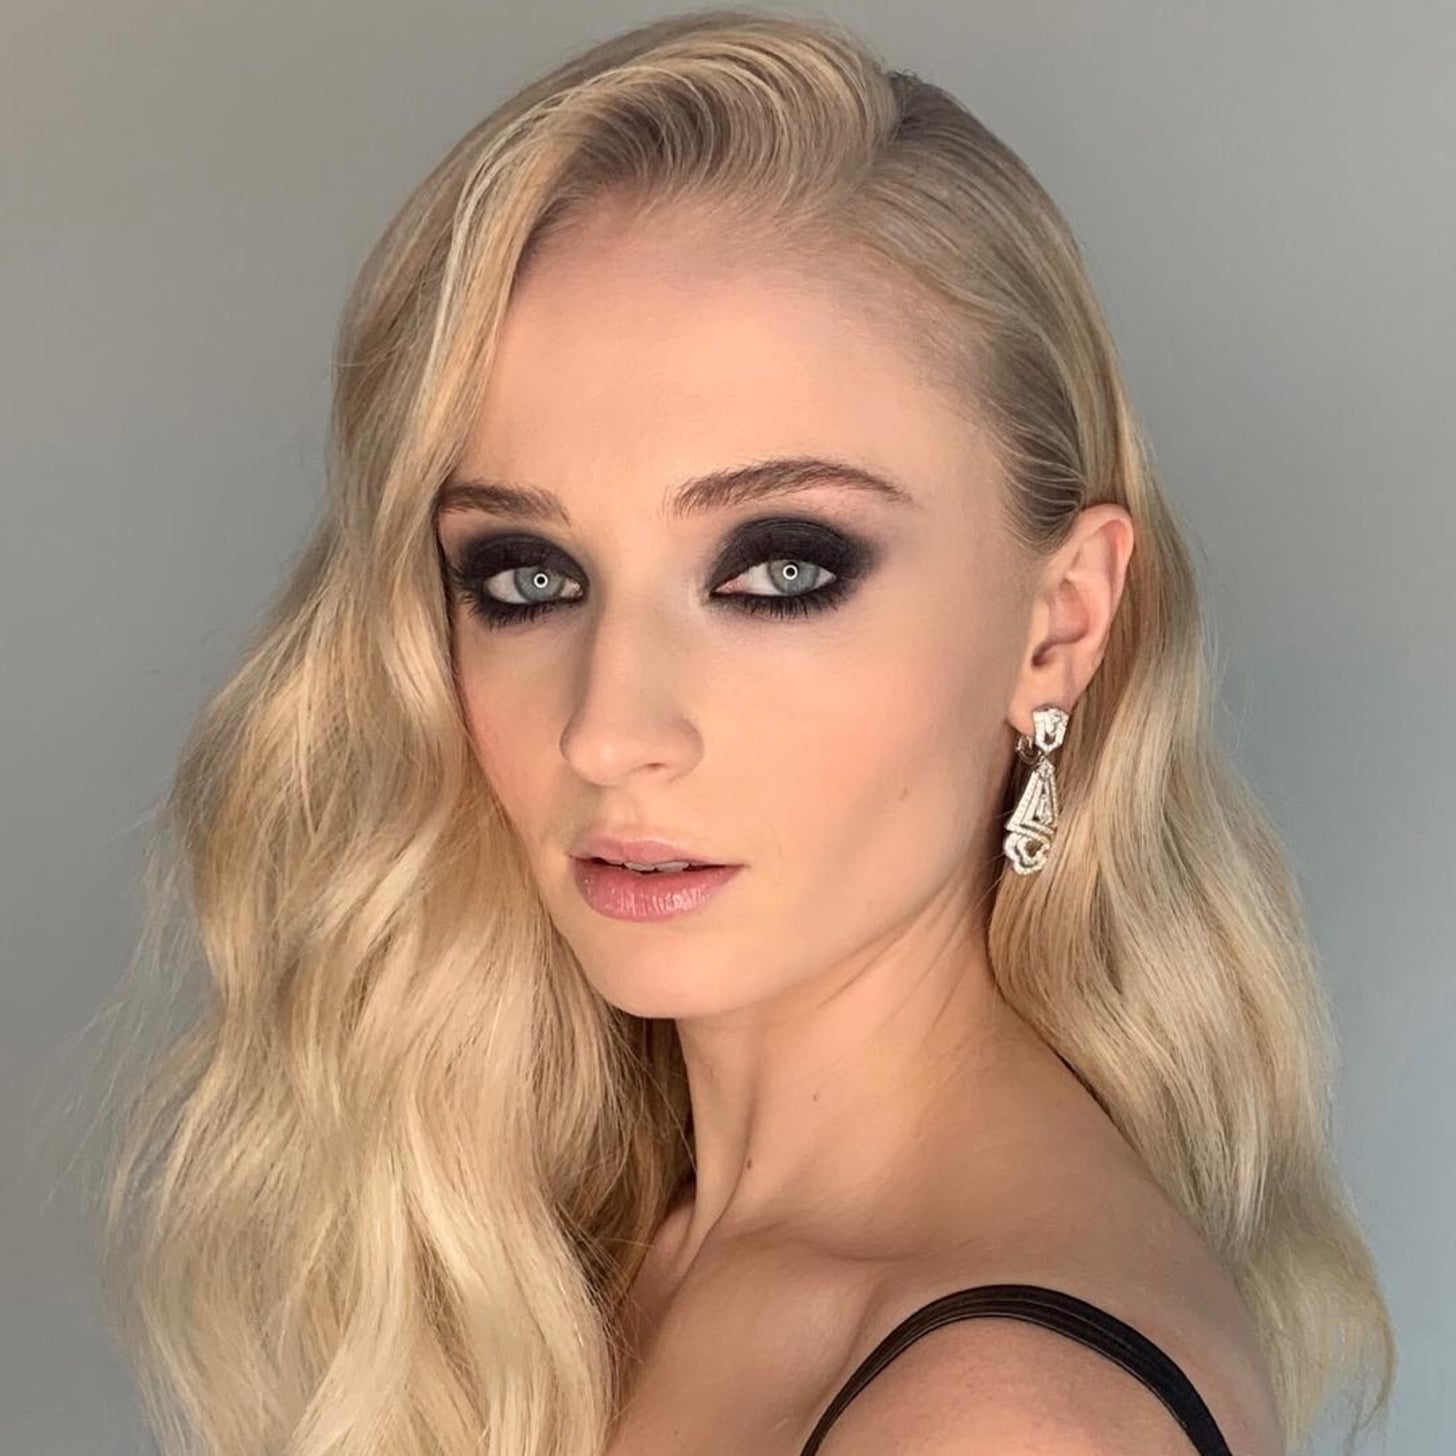 Sophie Turner Beauty Looks: Makeup & Hair Over The Years